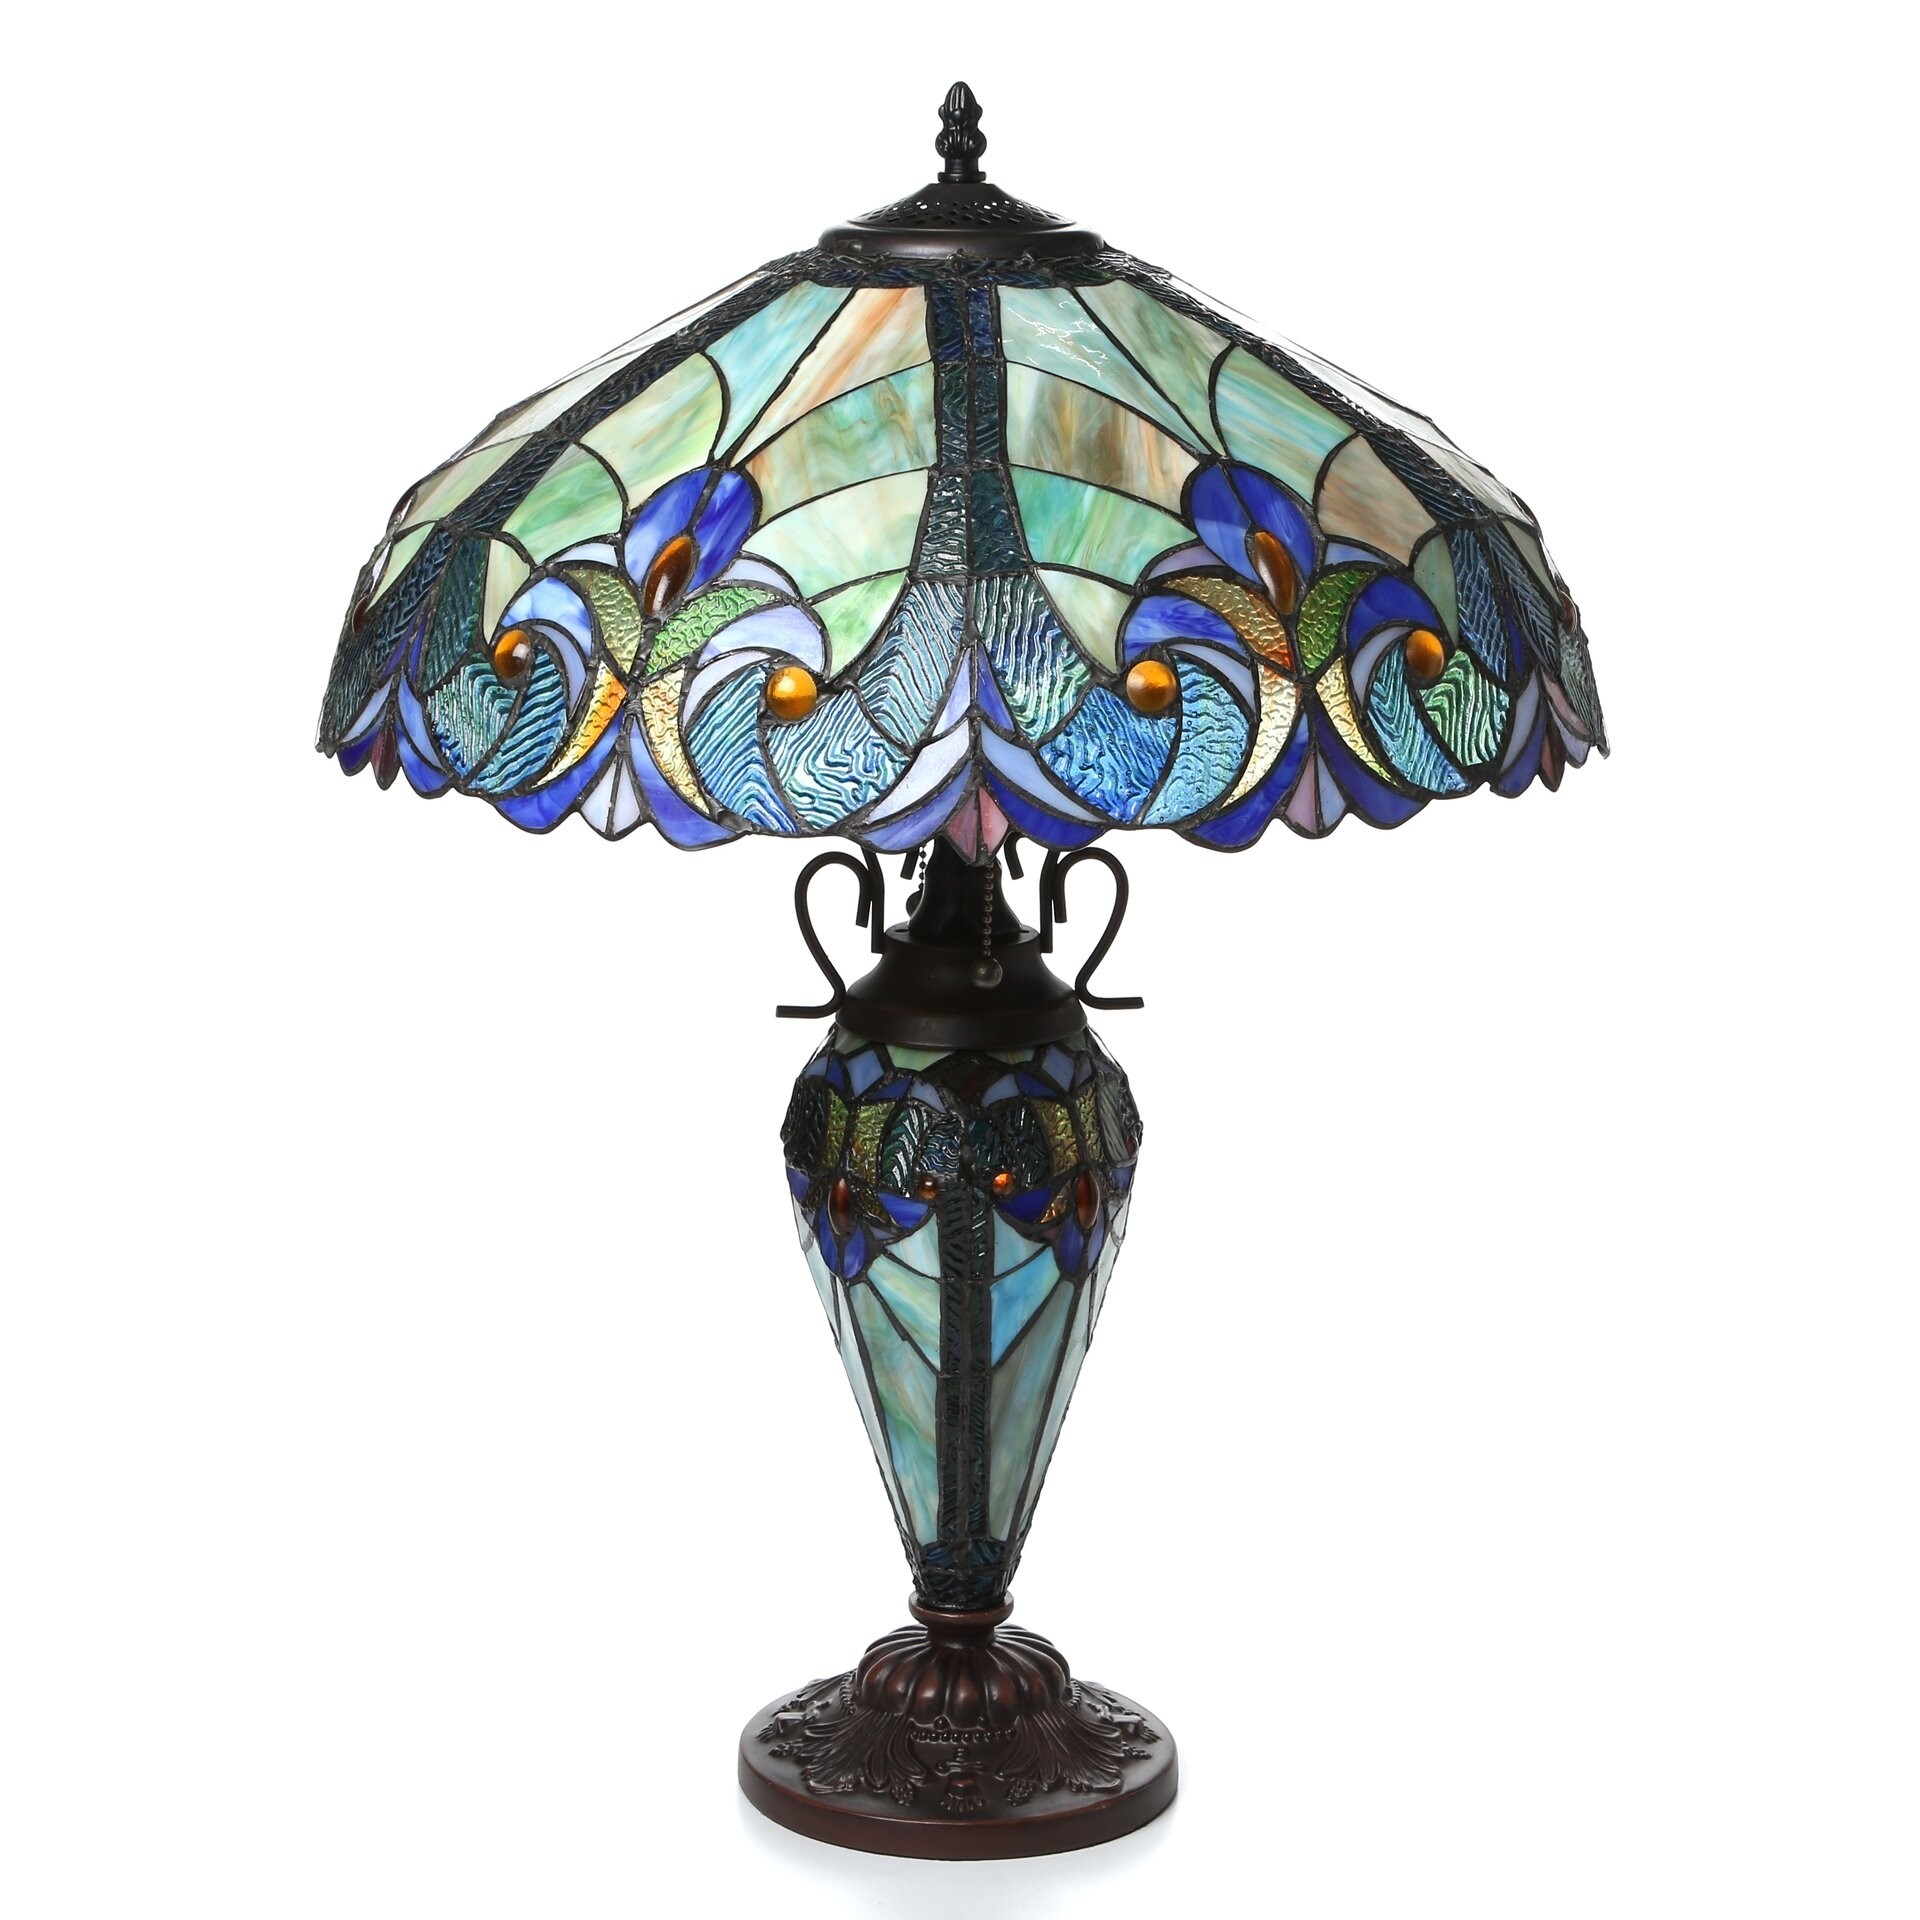 Tiffany Victorian 26" H Table Lamp with Bowl Shade